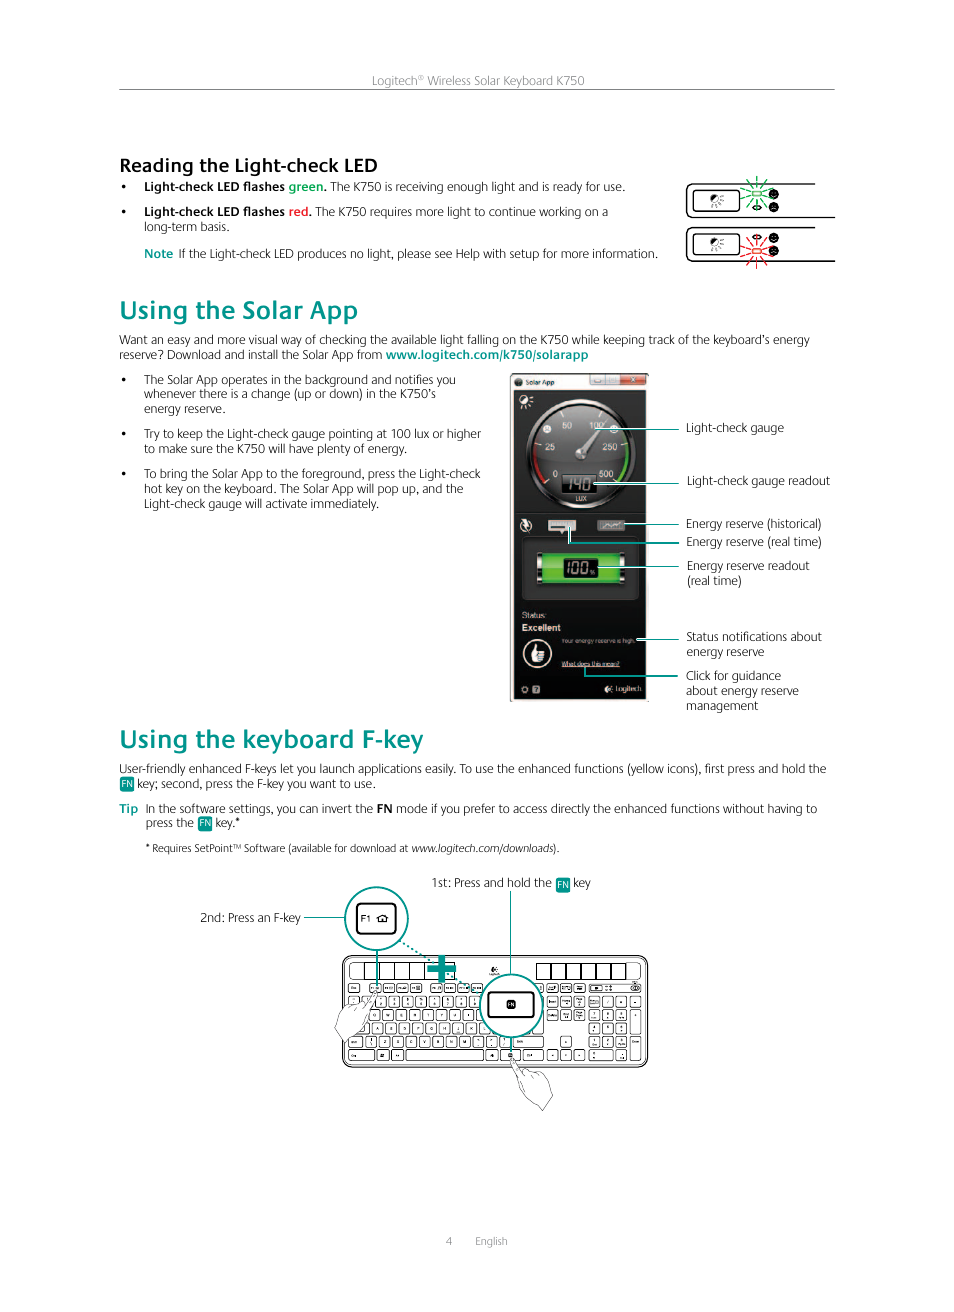 Using the solar app, Using the keyboard f-key, Reading the light-check led  | Logitech K750 User Manual | Page 4 / 20